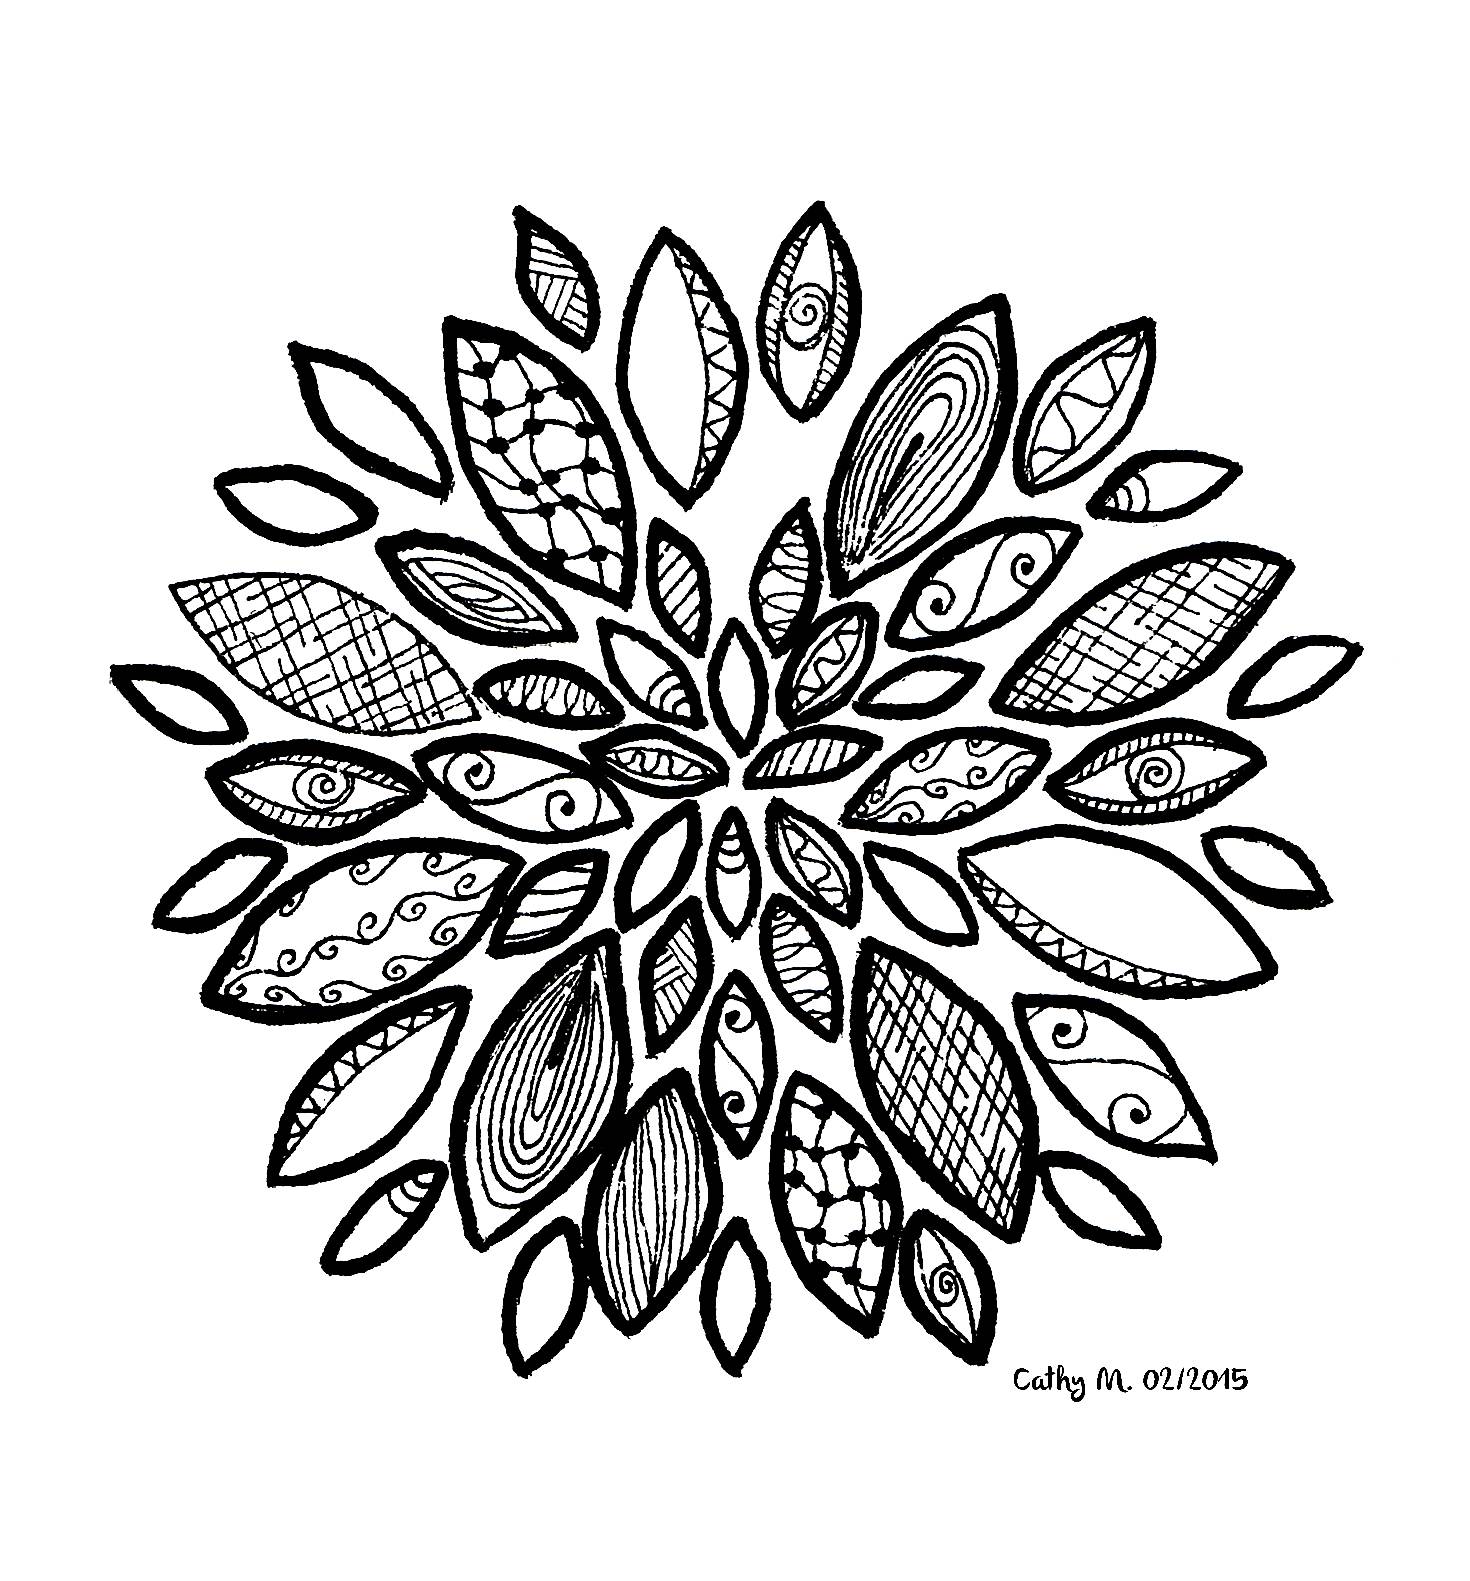 'Imaginary flower', exclusive zentangle coloring page See the original work